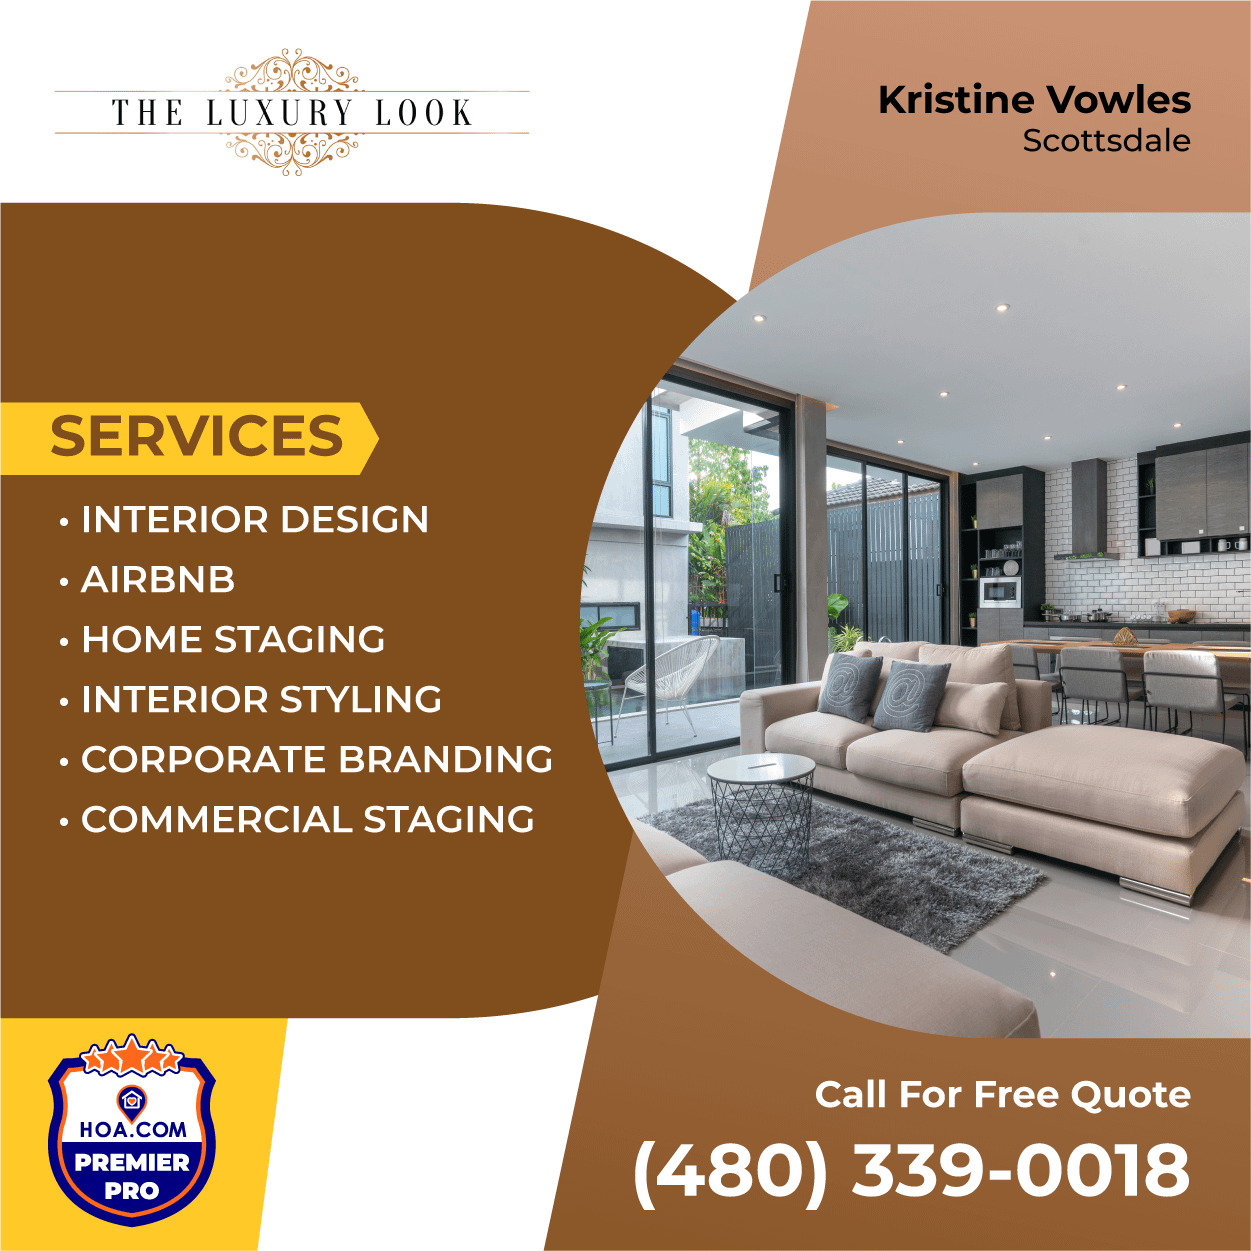 Services of The Luxury Look